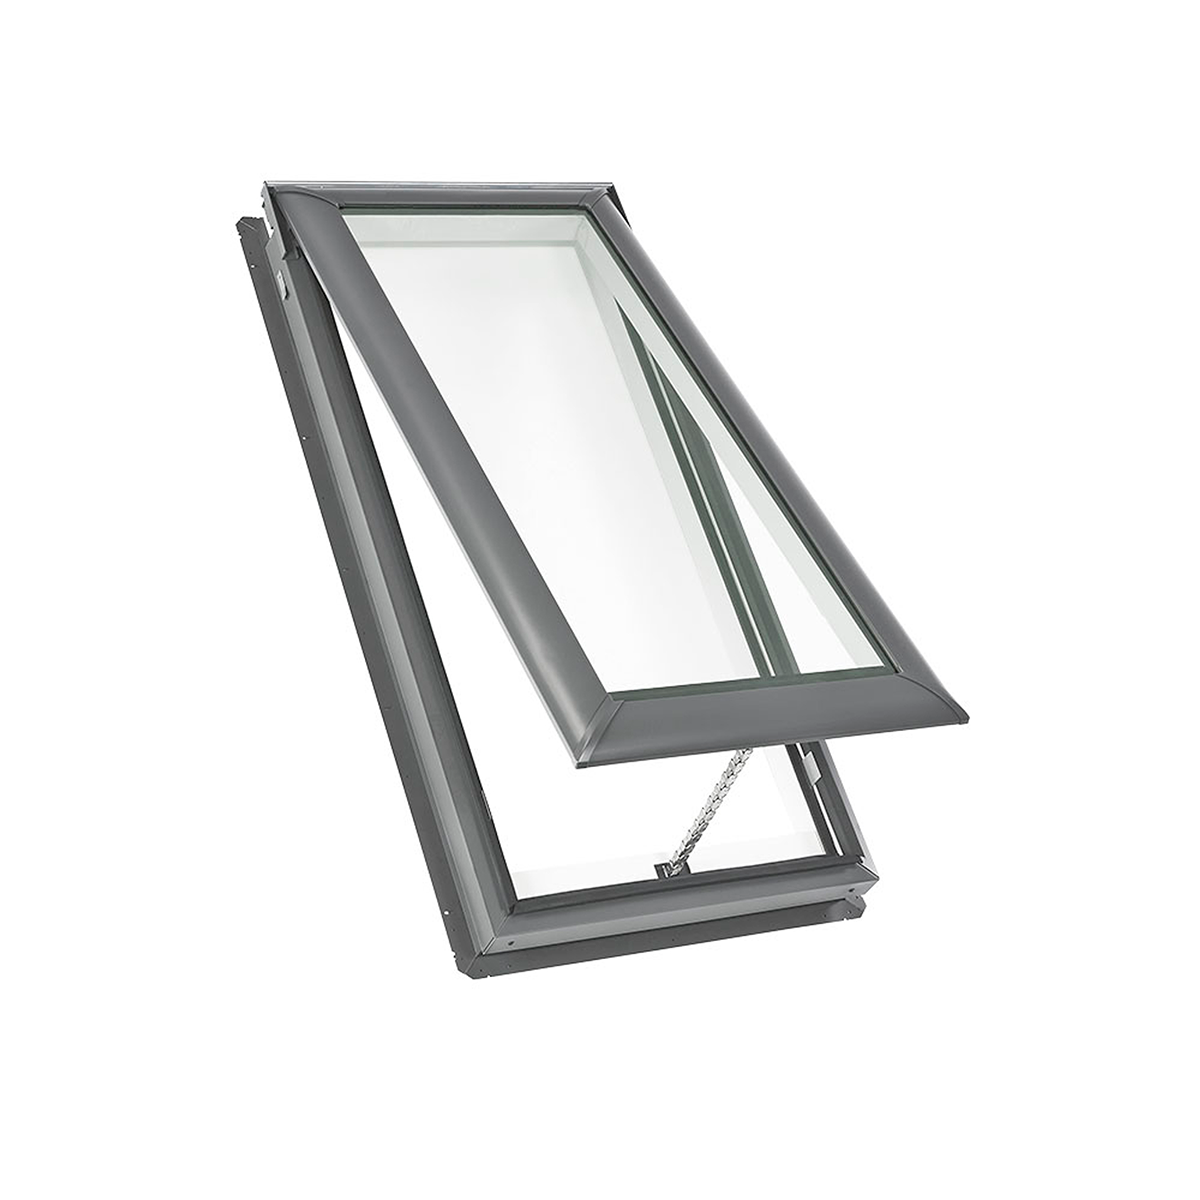 Manual Deck-Mount Skylight with Laminated Low-E3 Glass - 21 in. x 37-7/8 in. - VS C04